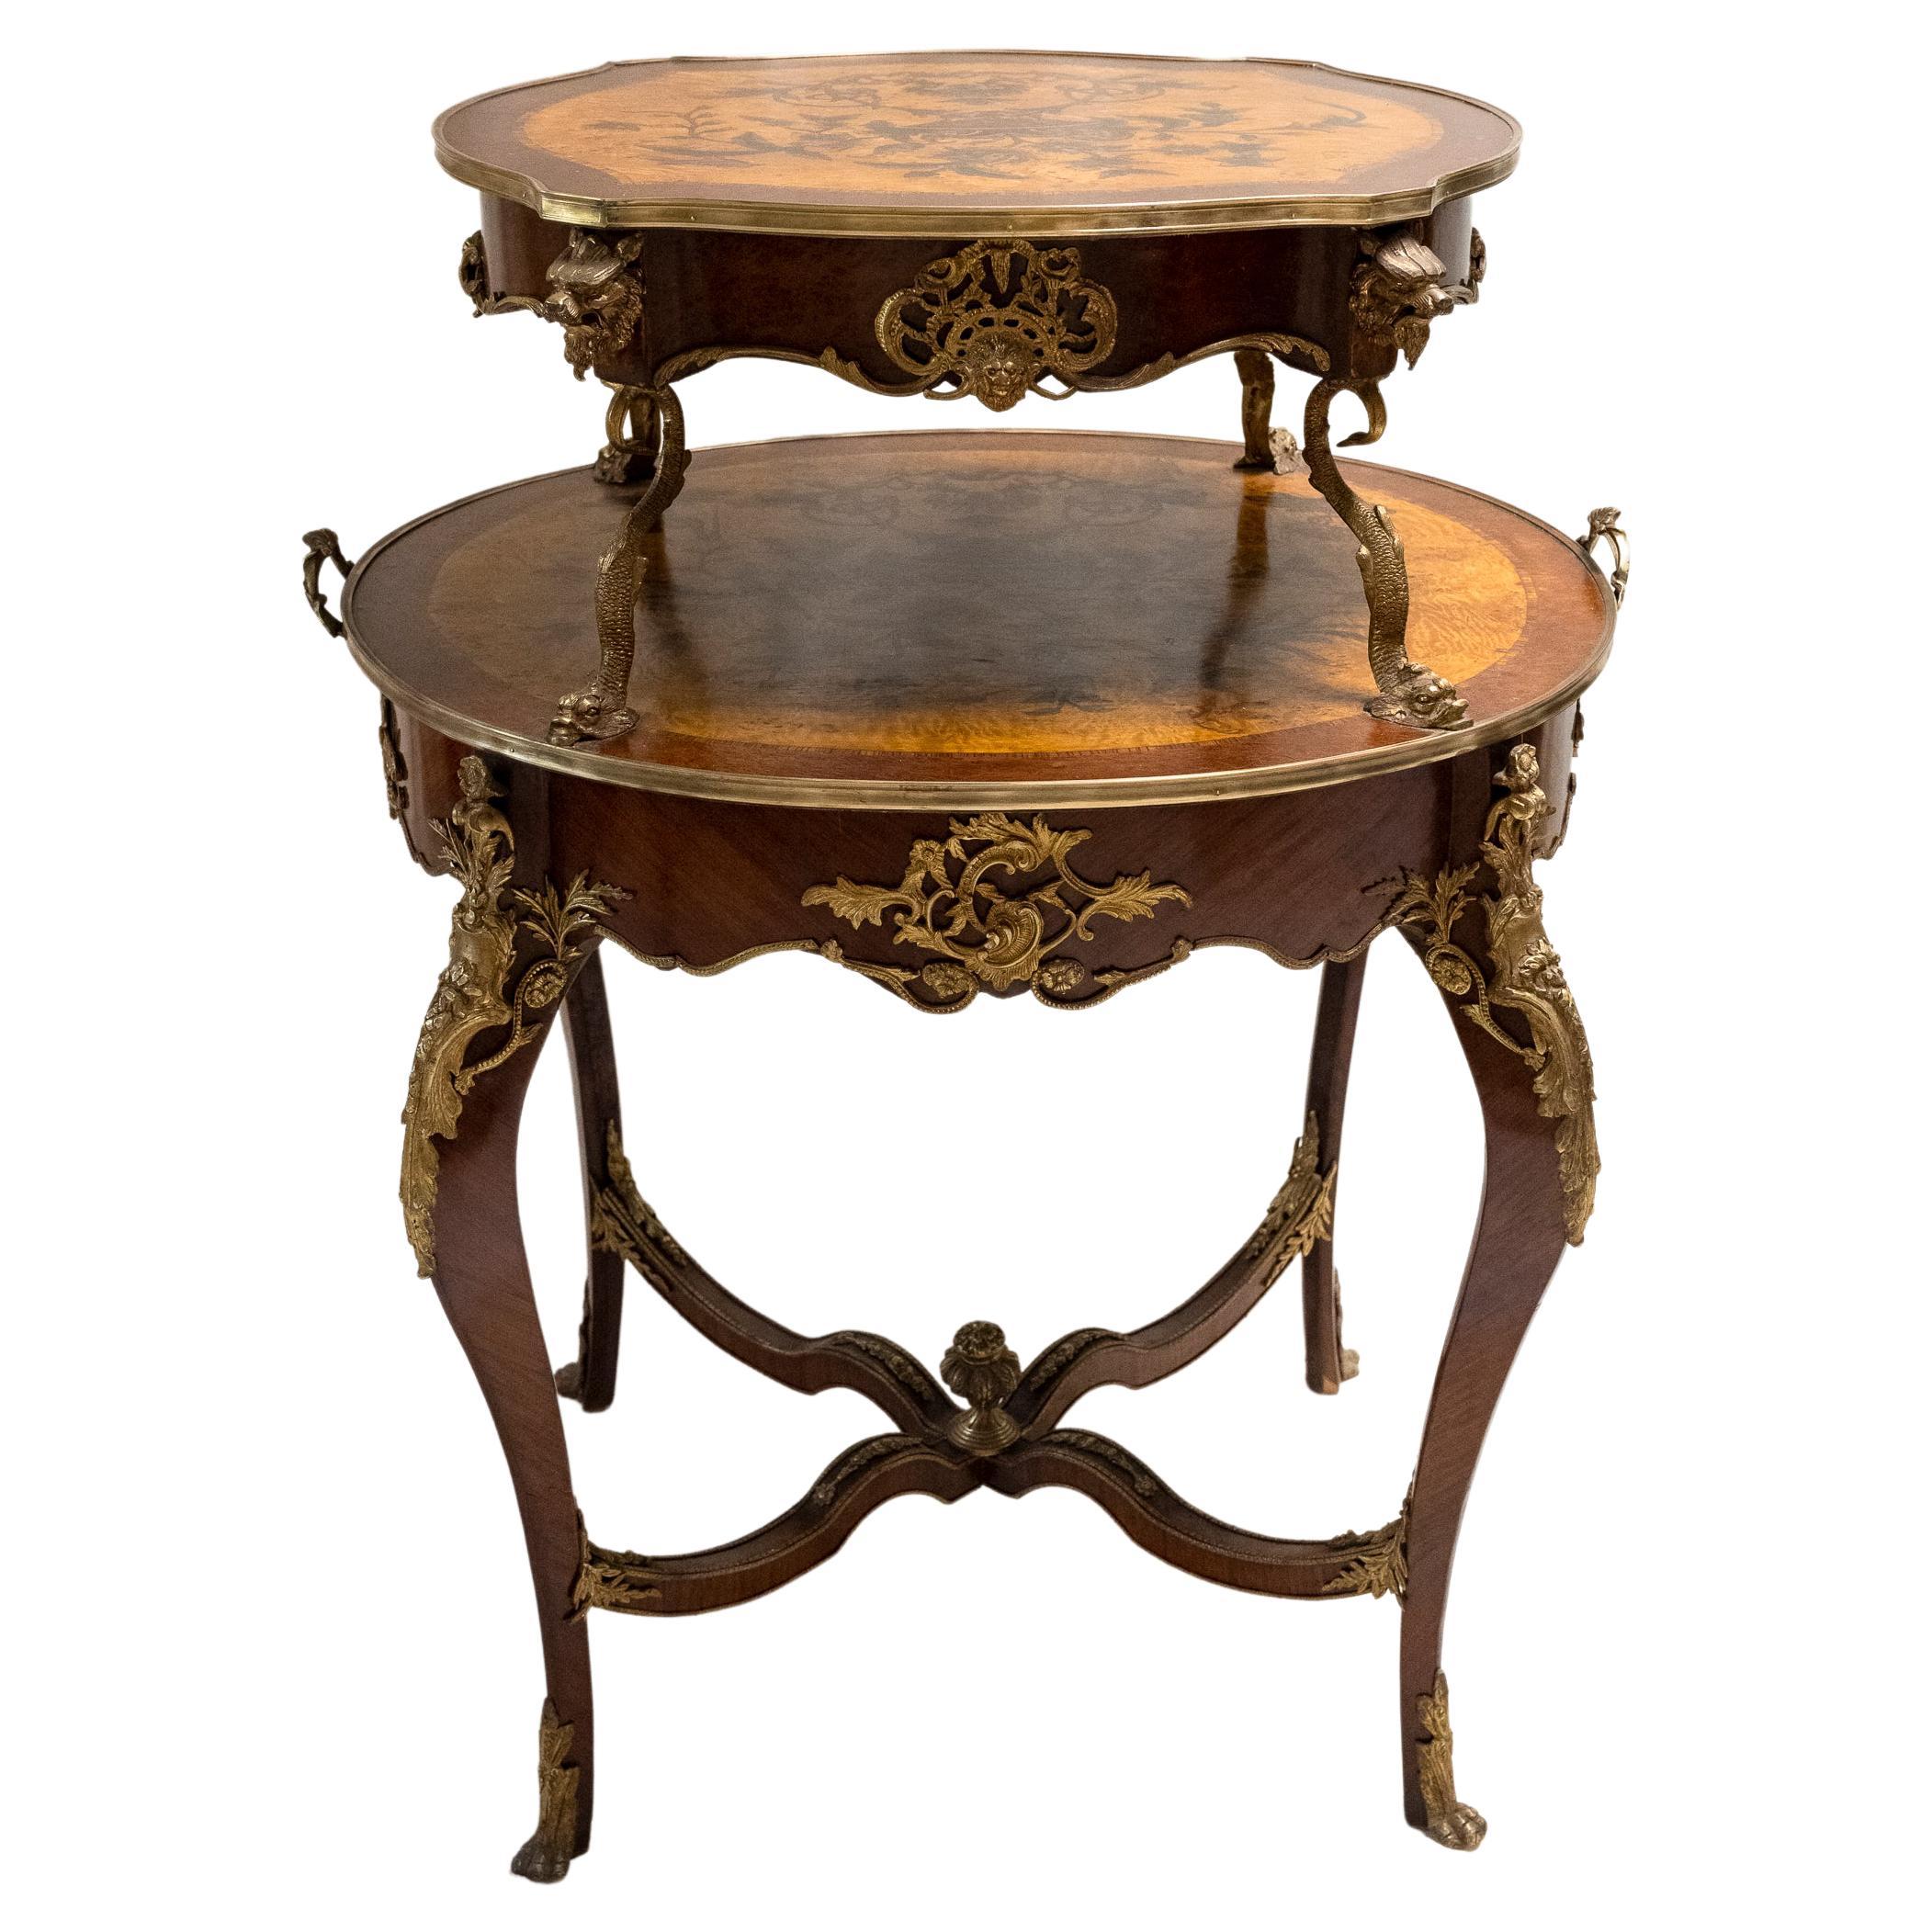 19th Century Louis XV Two-Tier Parquetry Dessert Table